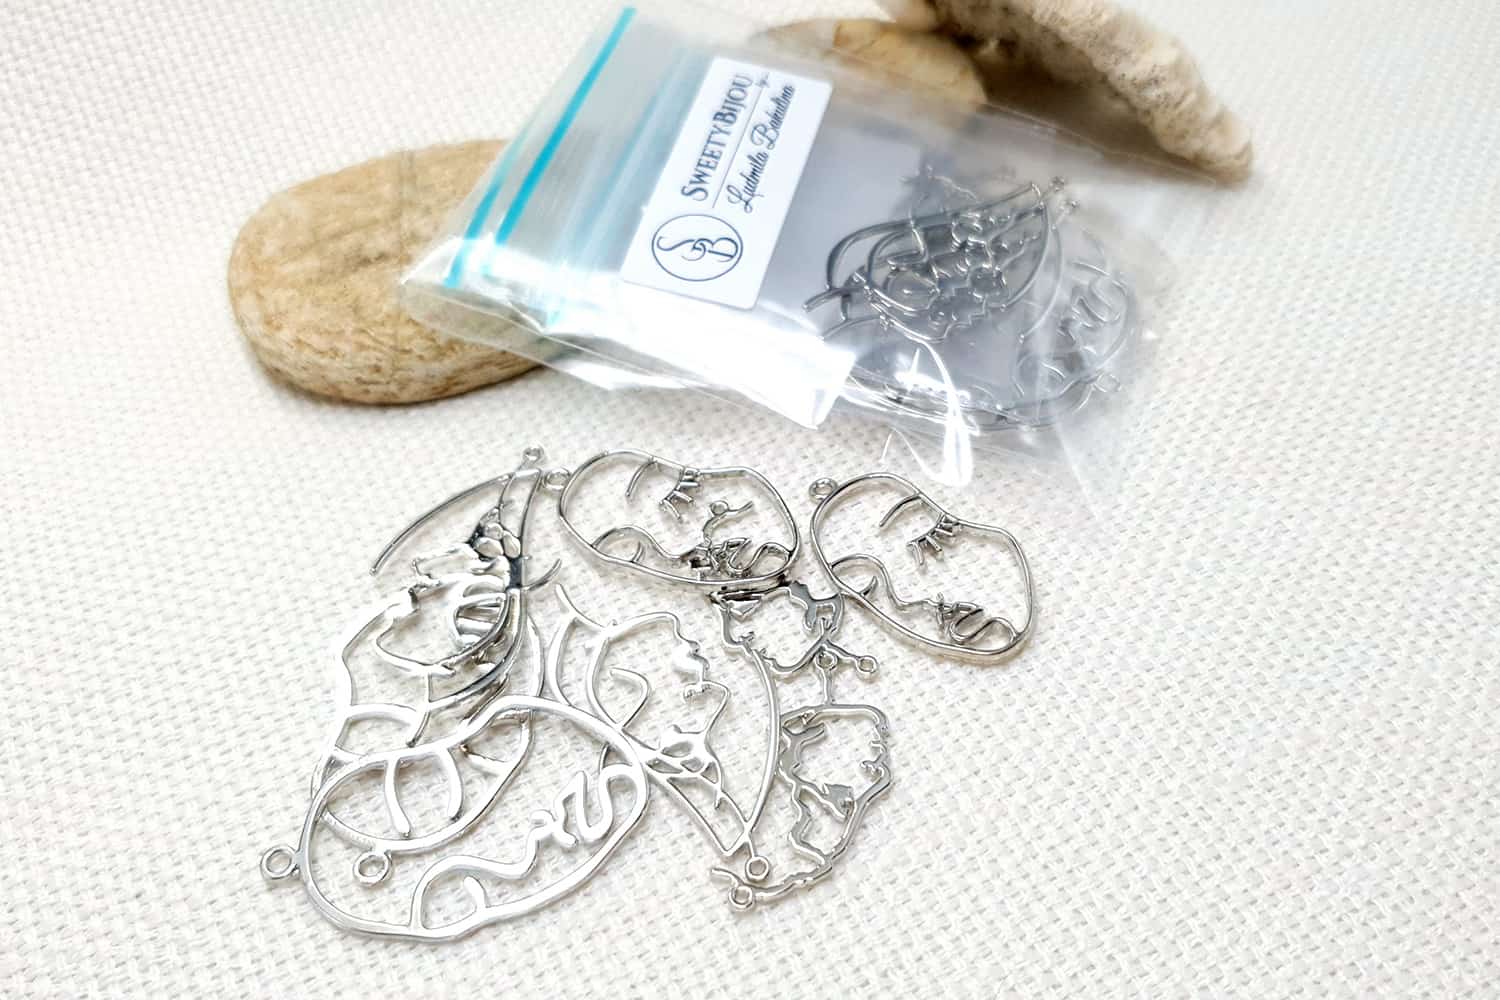 Faces - Set of 8pcs Silver Color Metal Jewelry Findings (22385)